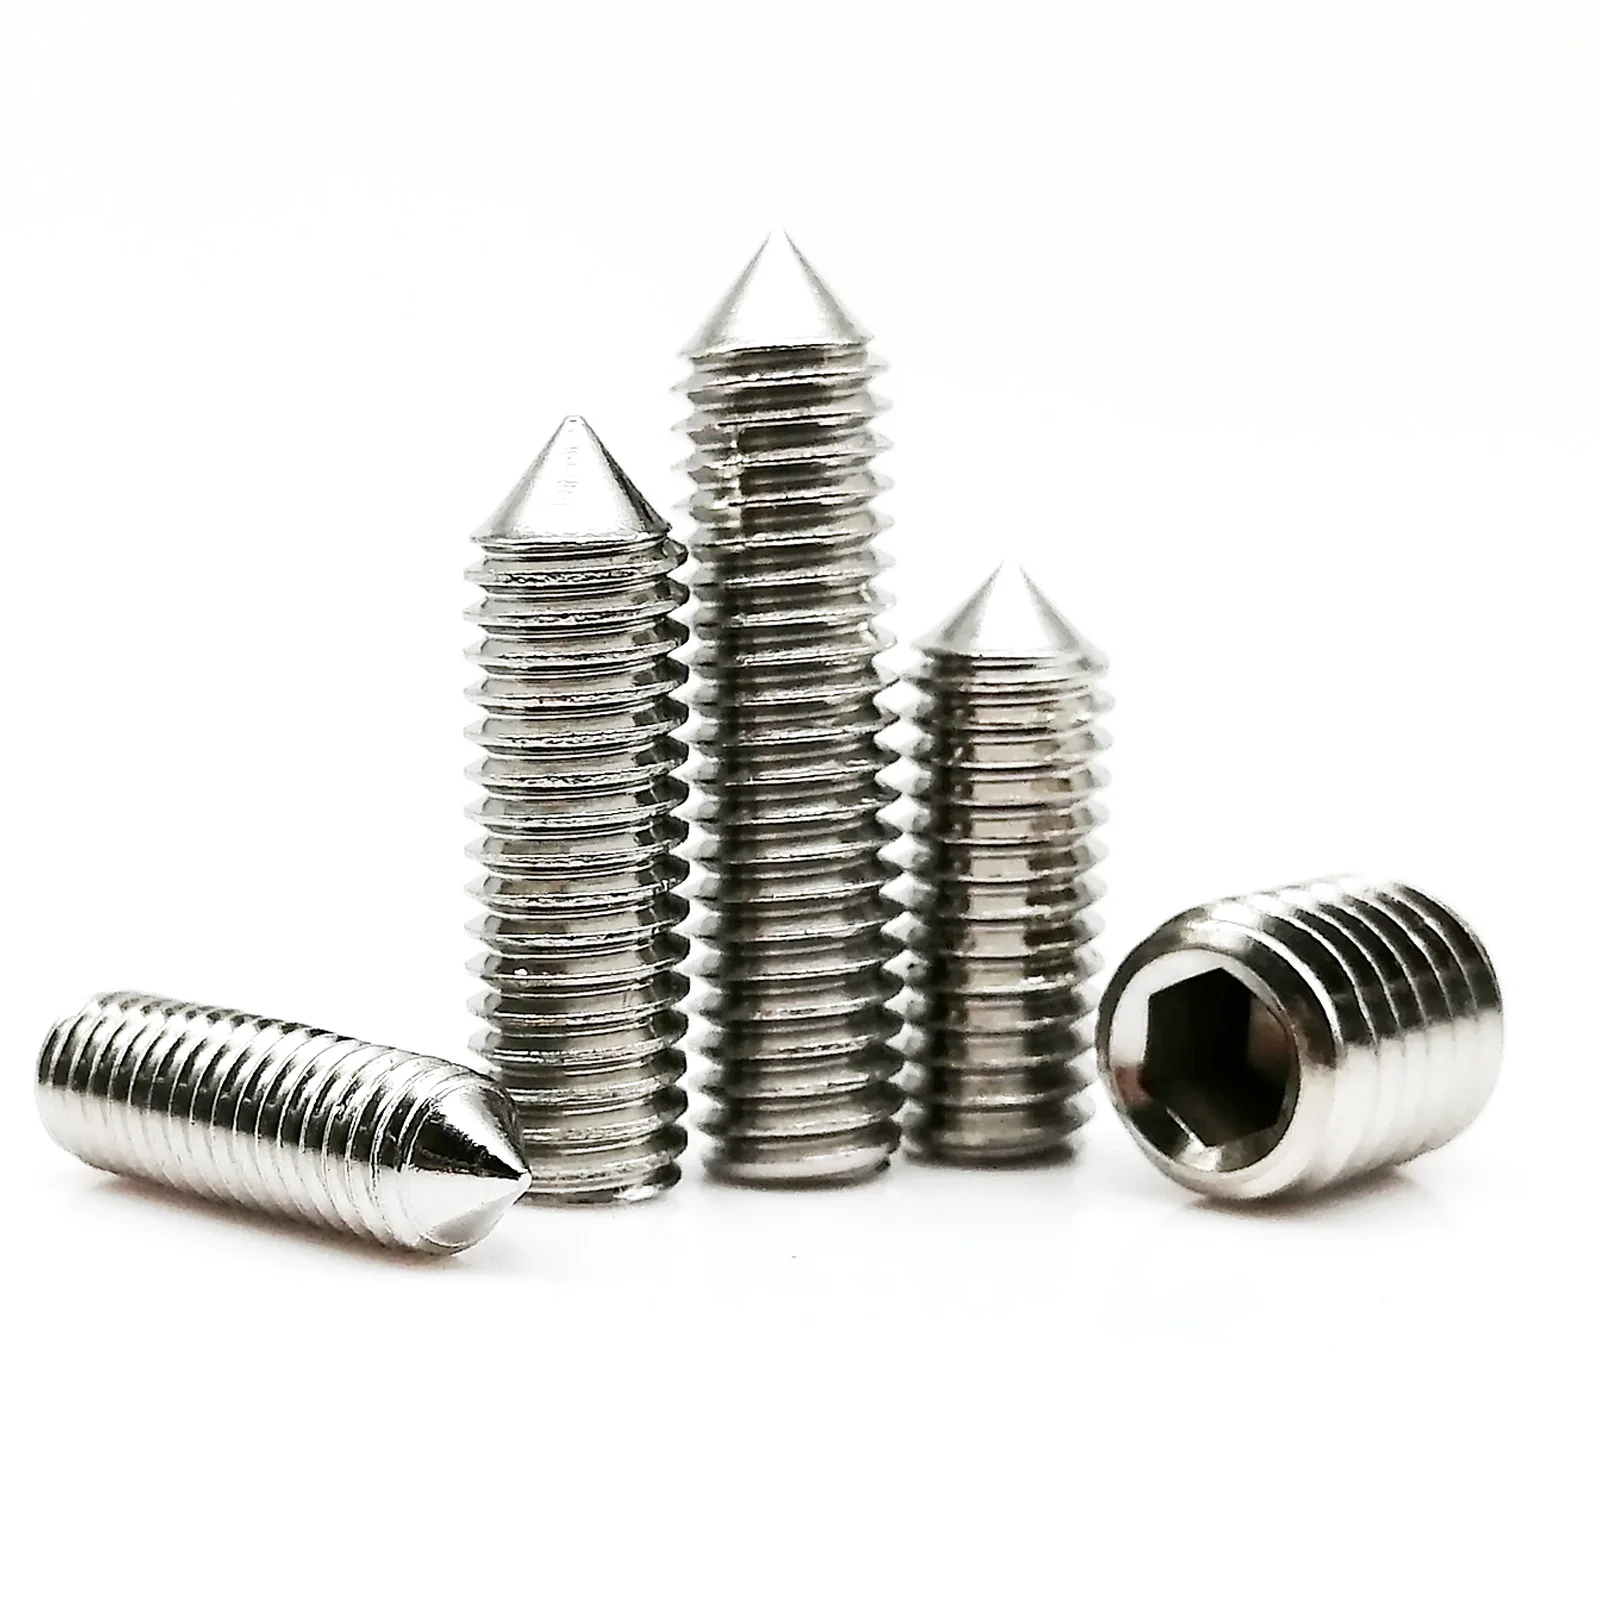 

1/10/50pcs M2 M2.5 M3 M4 M5 M6 M8 M10 M12 M16 304 Stainless Steel Hex Hexagon Socket Tapered End Bolt Cone Point Grub Set Screw